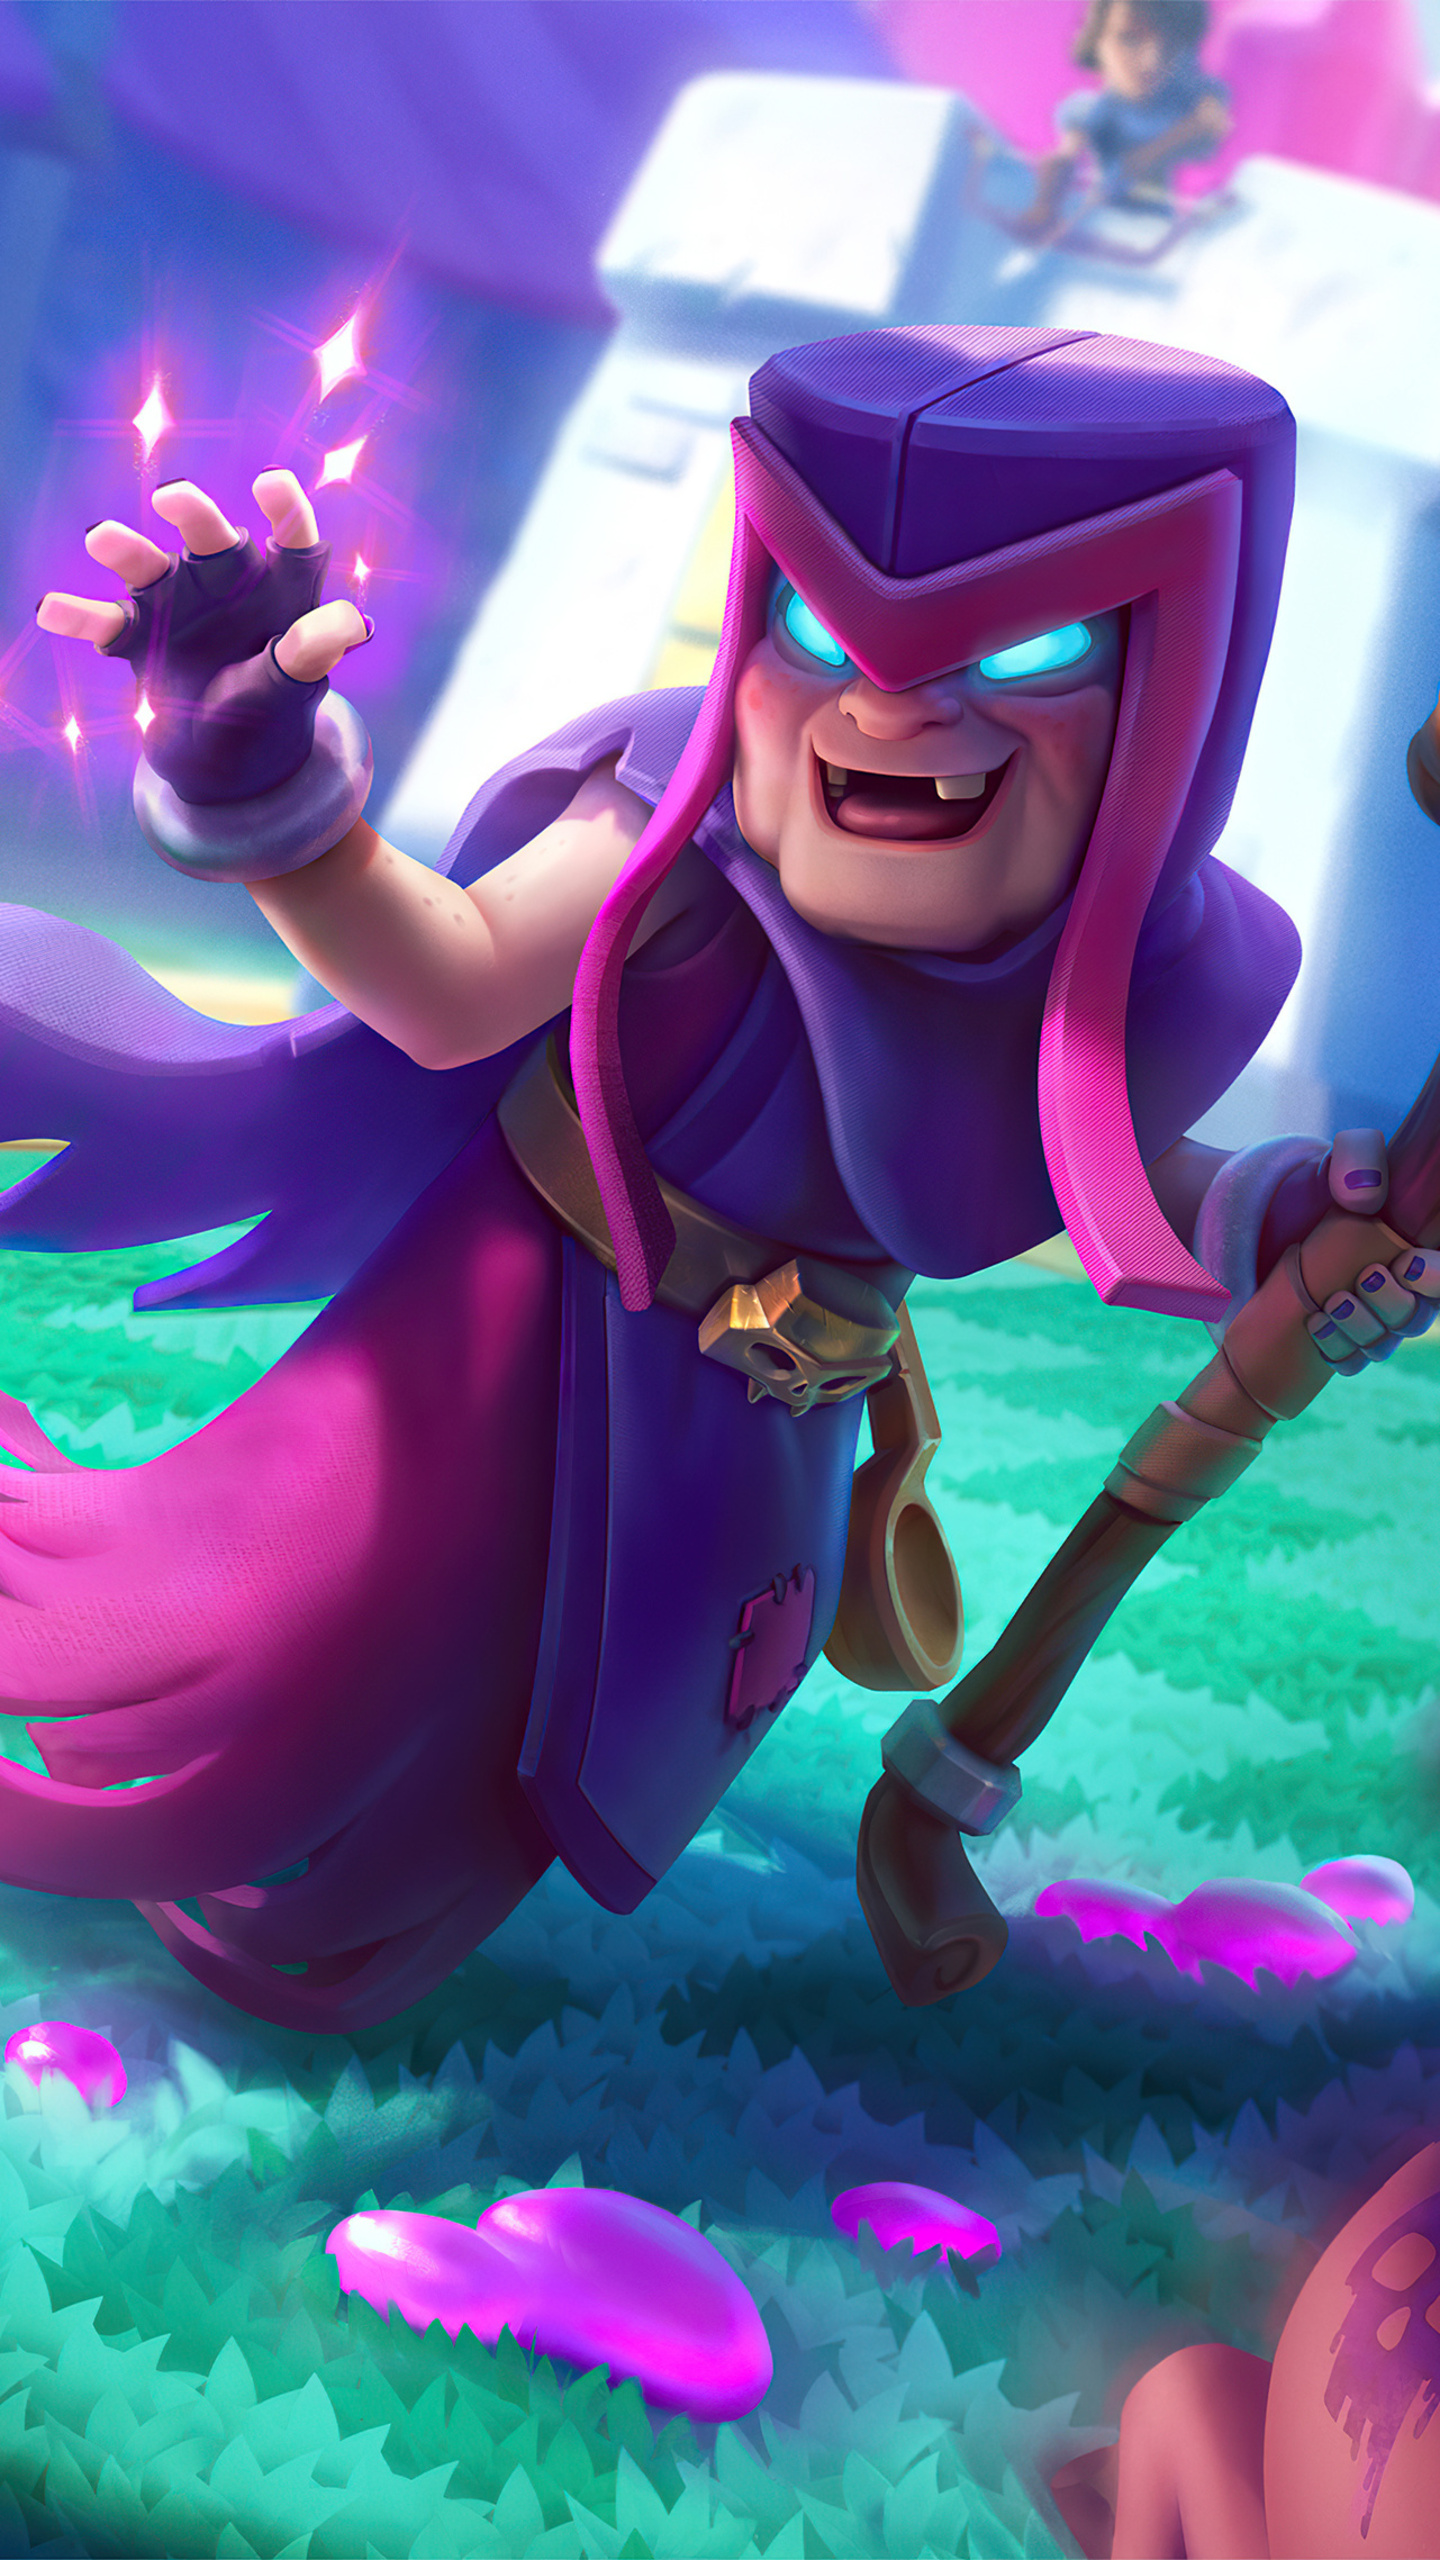 Clash Royale 2020 Wallpapers